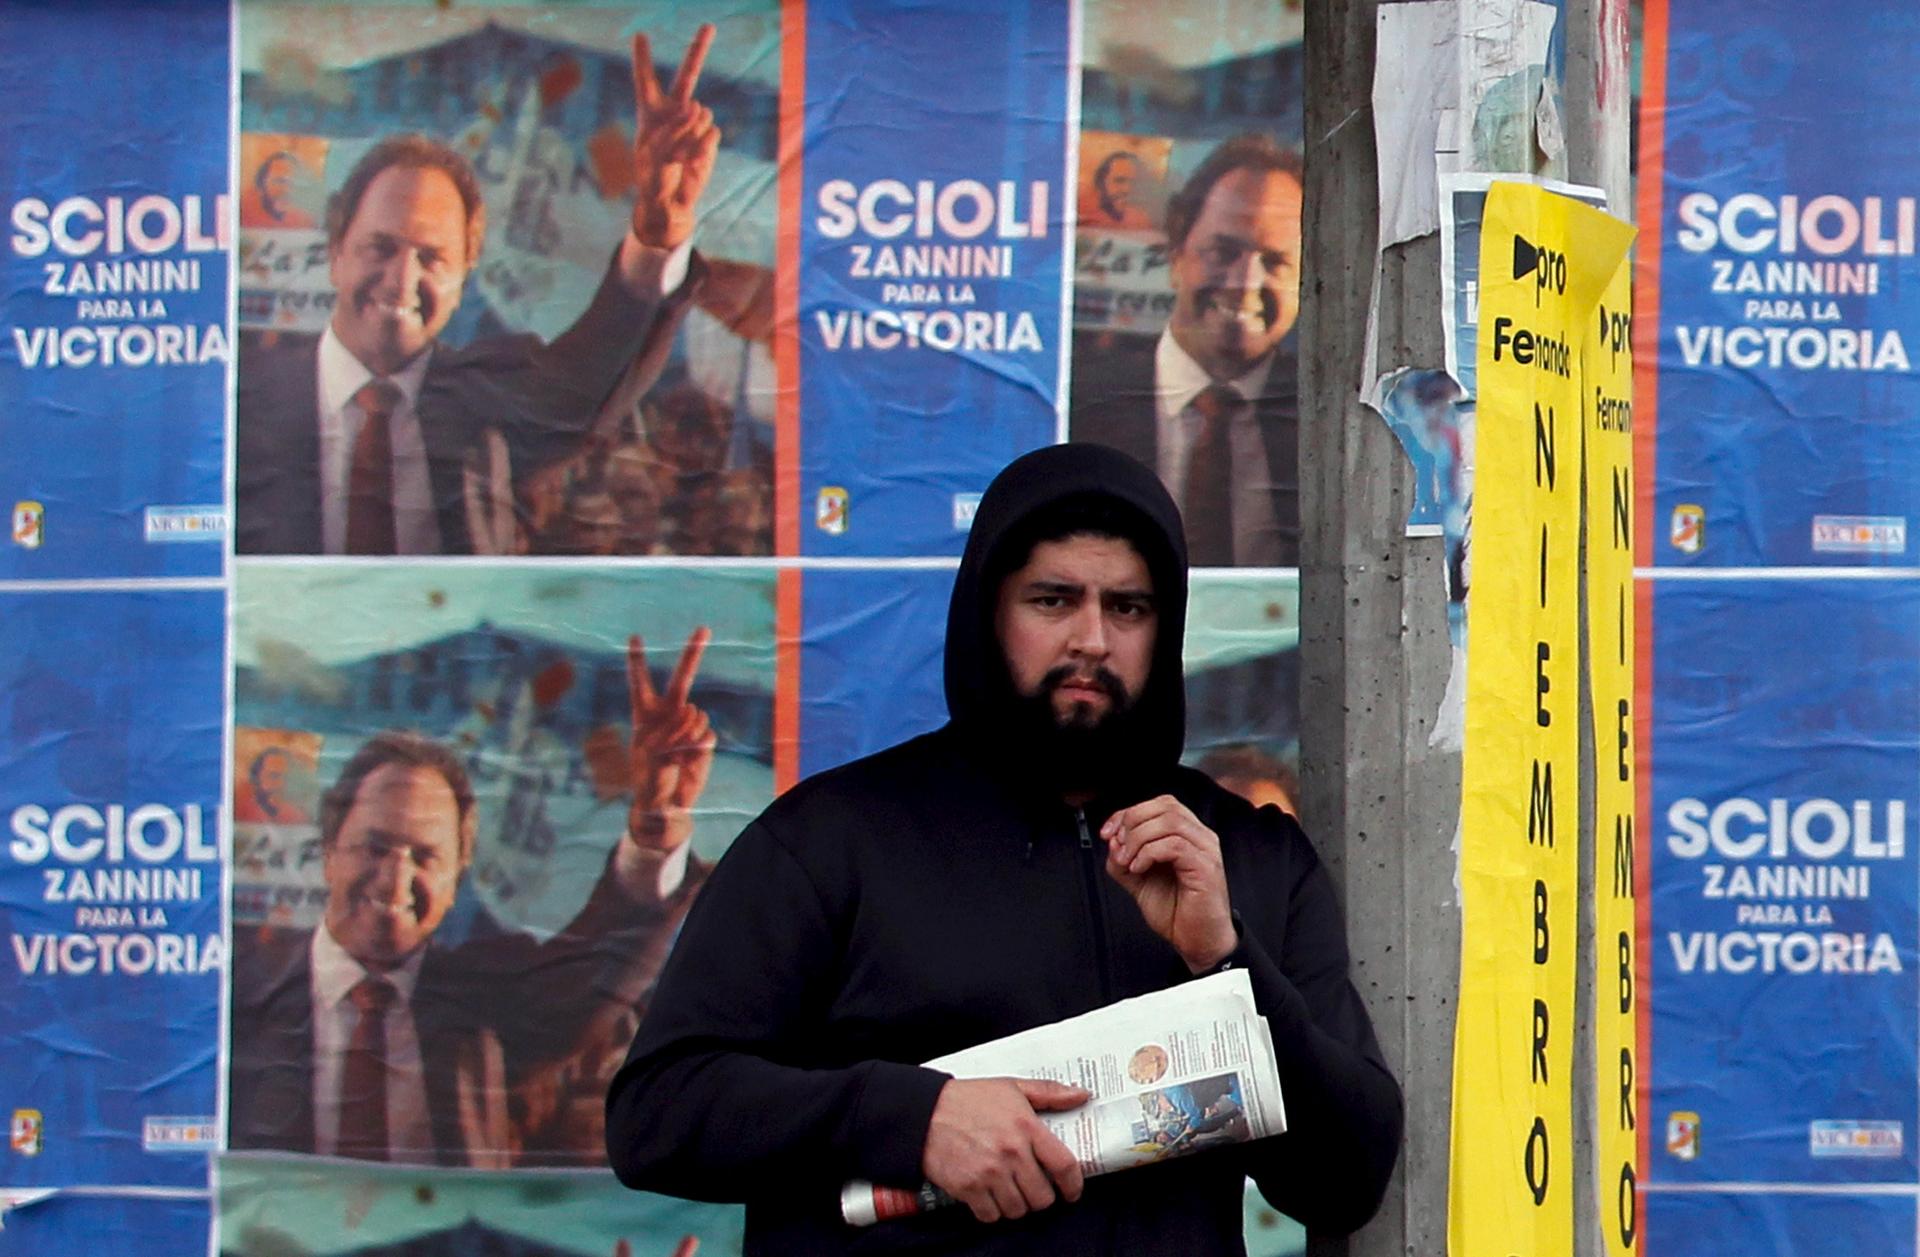 A man stands at a bus stop in front of campaign posters advertising Buenos Aires' province governor and presidential candidate Daniel Scioli, ahead of August 9 party primary elections